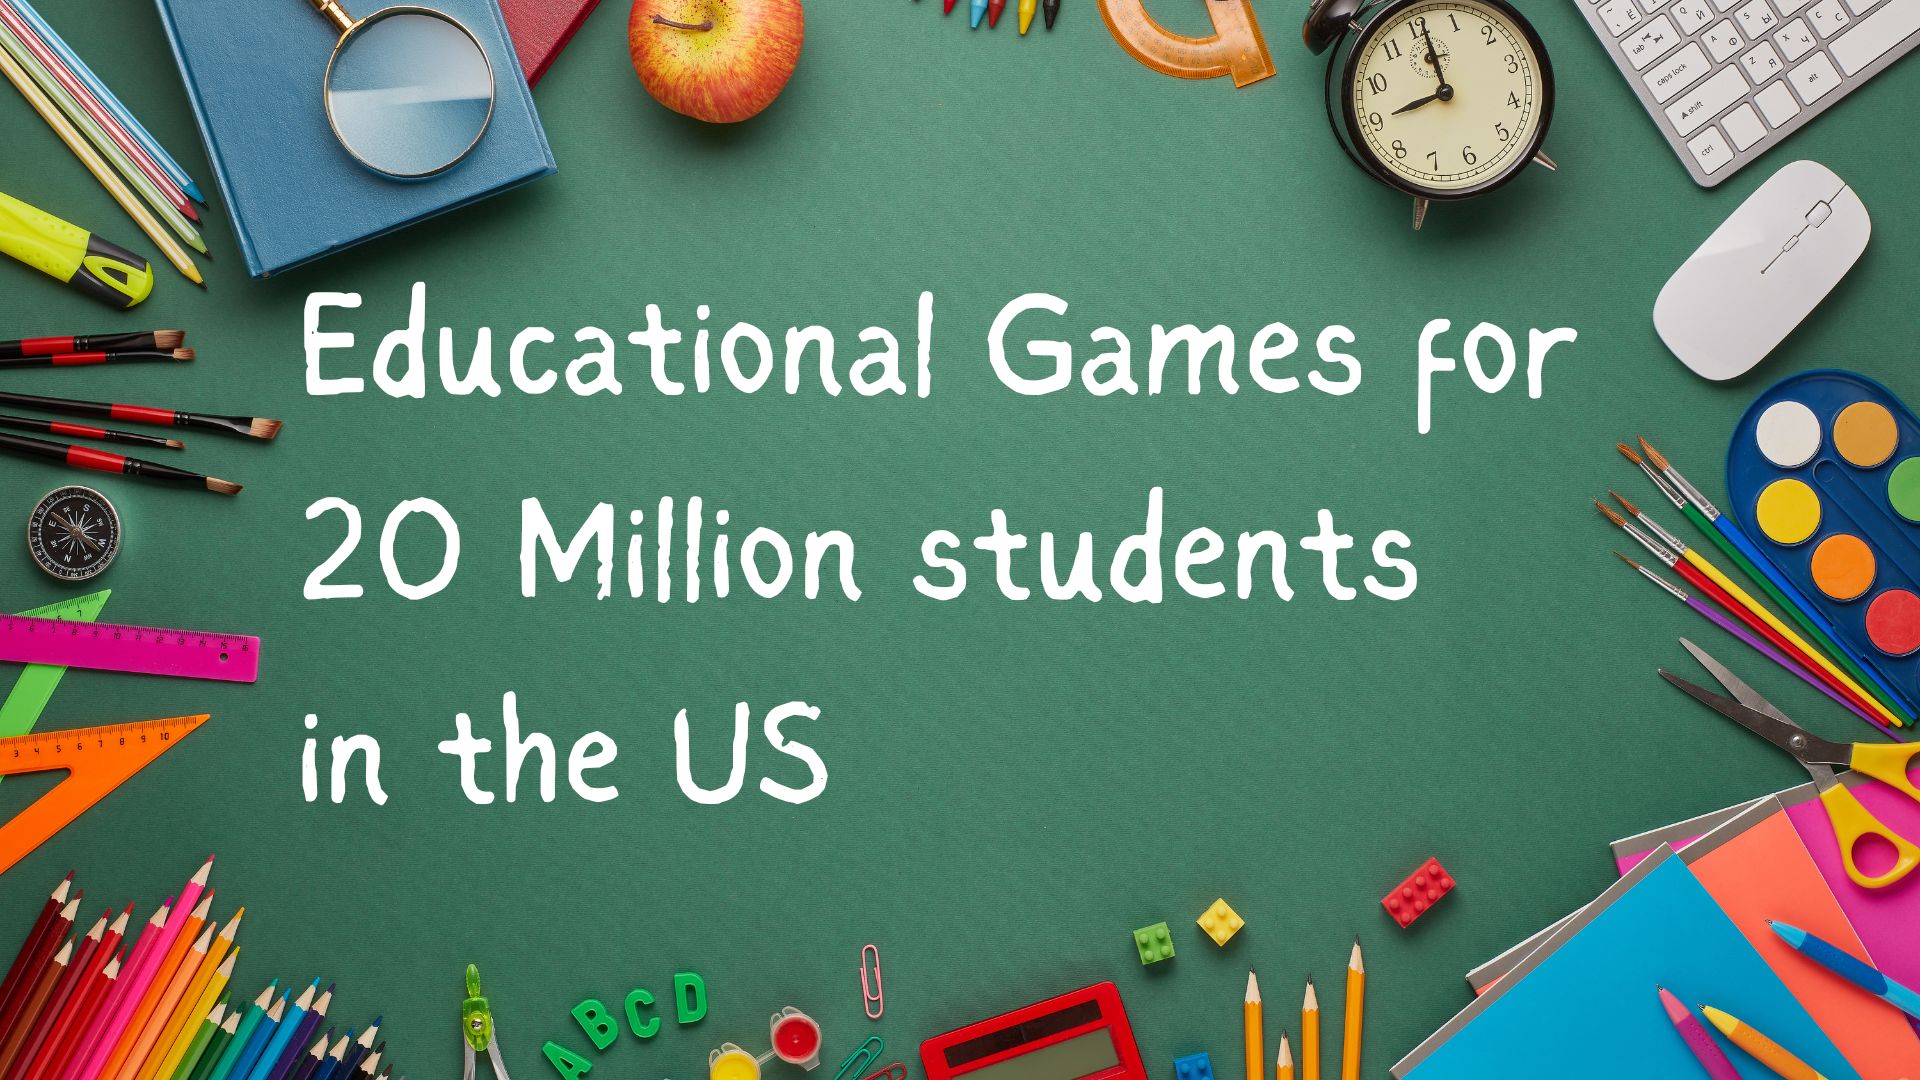 Educational Games for 20 Million Students in the US